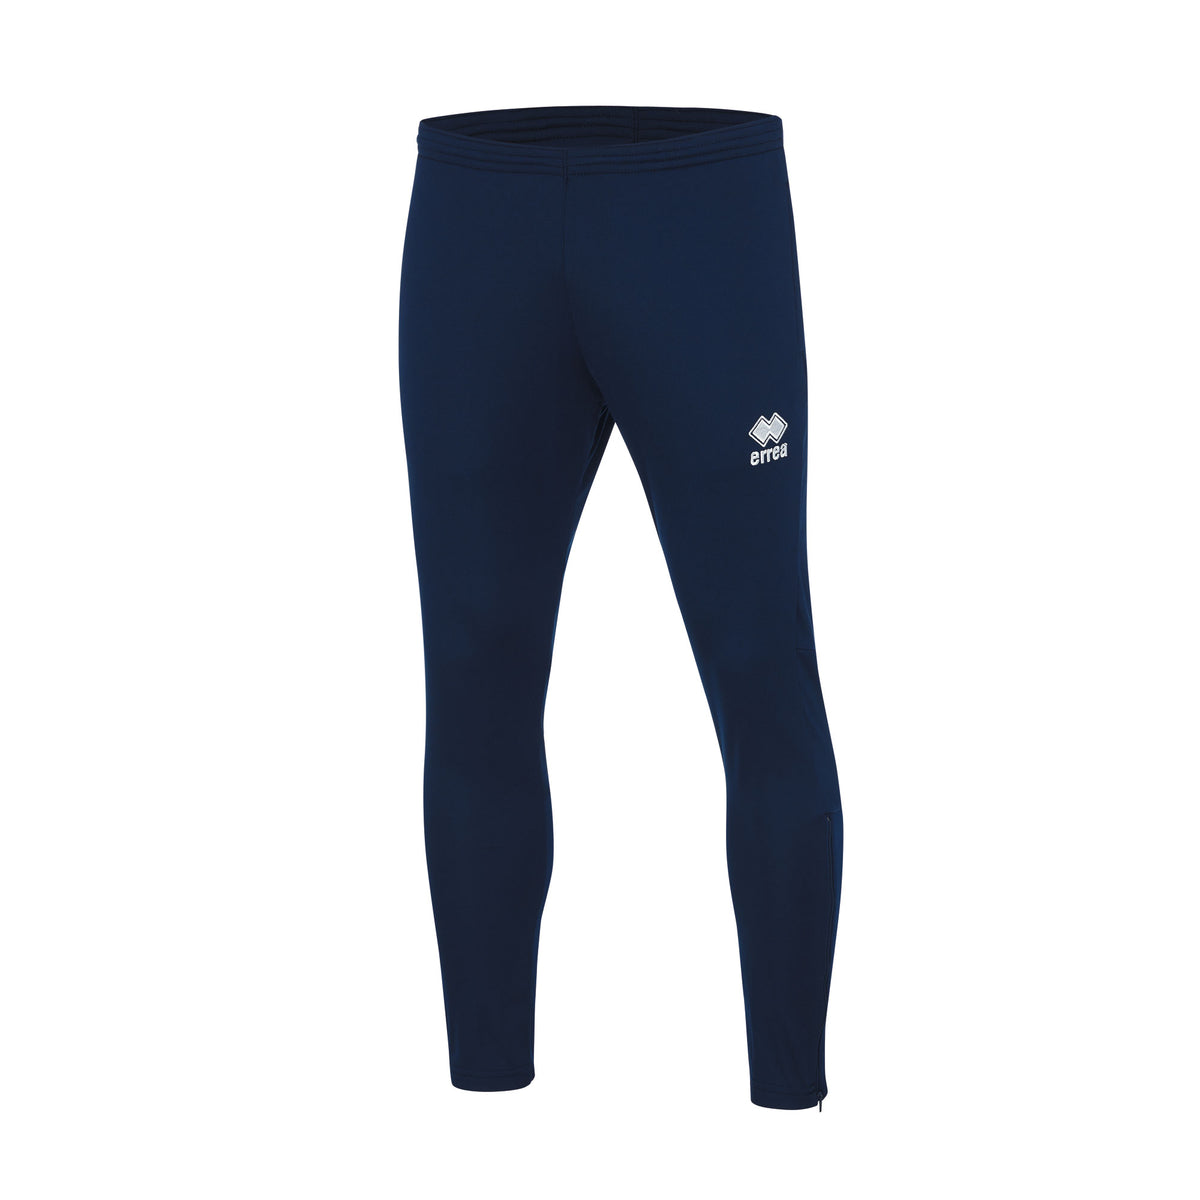 Buddy Flann Tracksuit Set in Adult